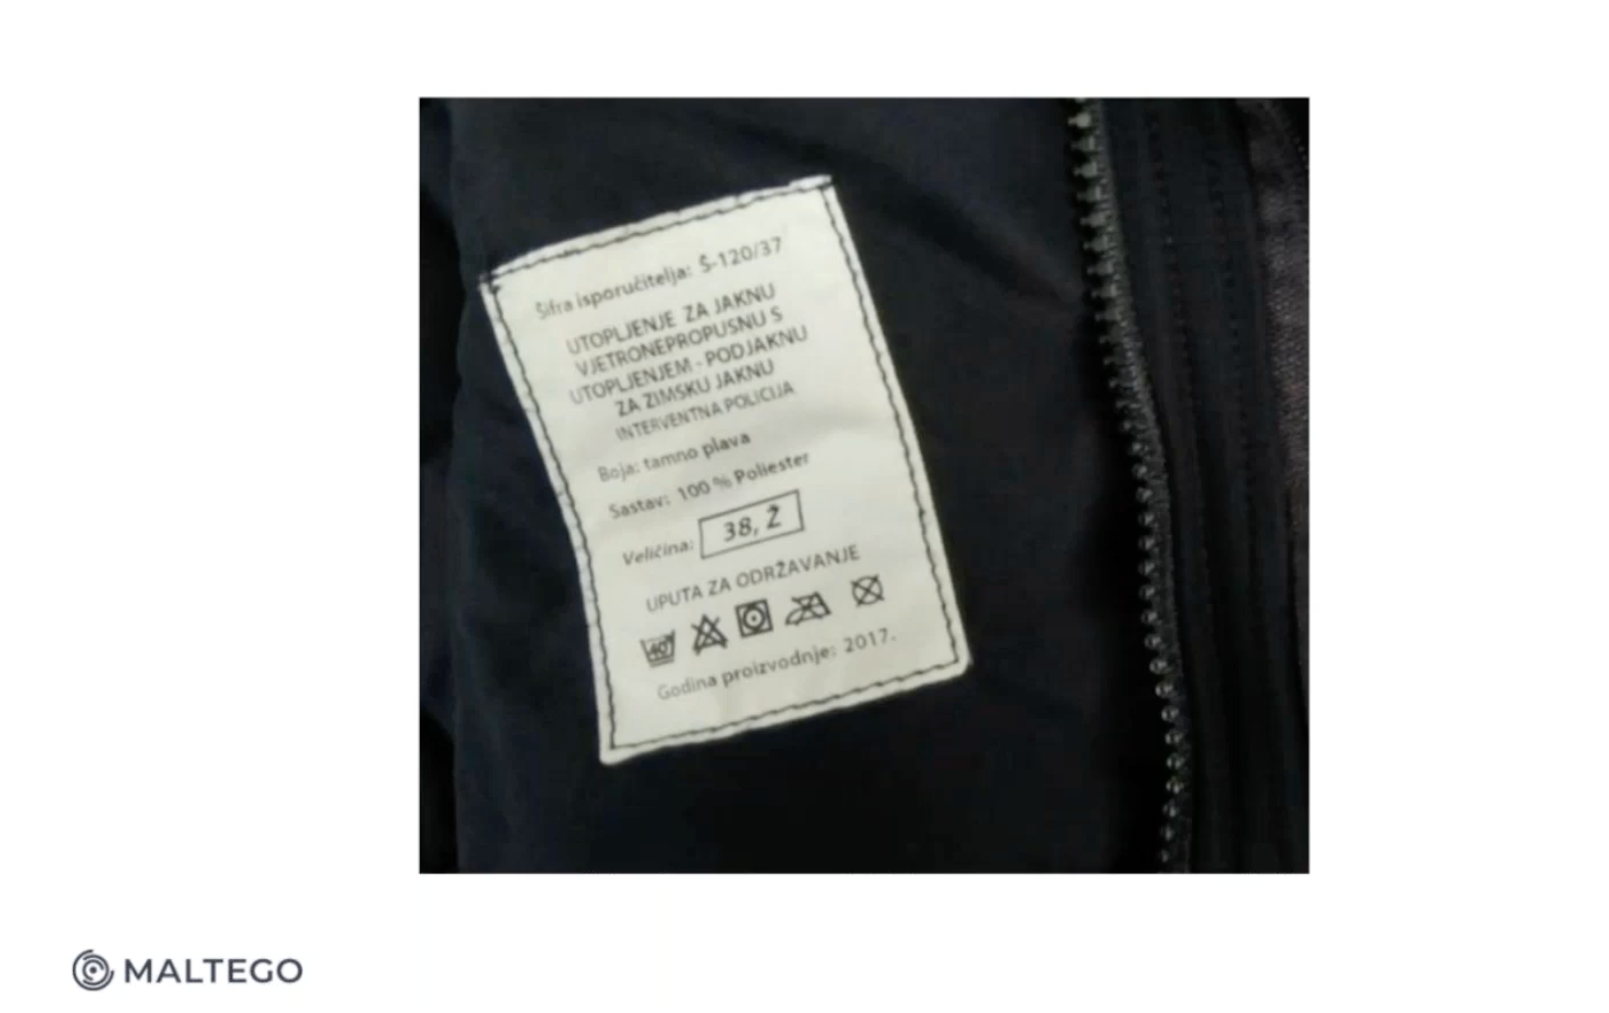 A tag in the jacket&rsquo;s interior with “INTERVENTNA POLICIJA” written on it